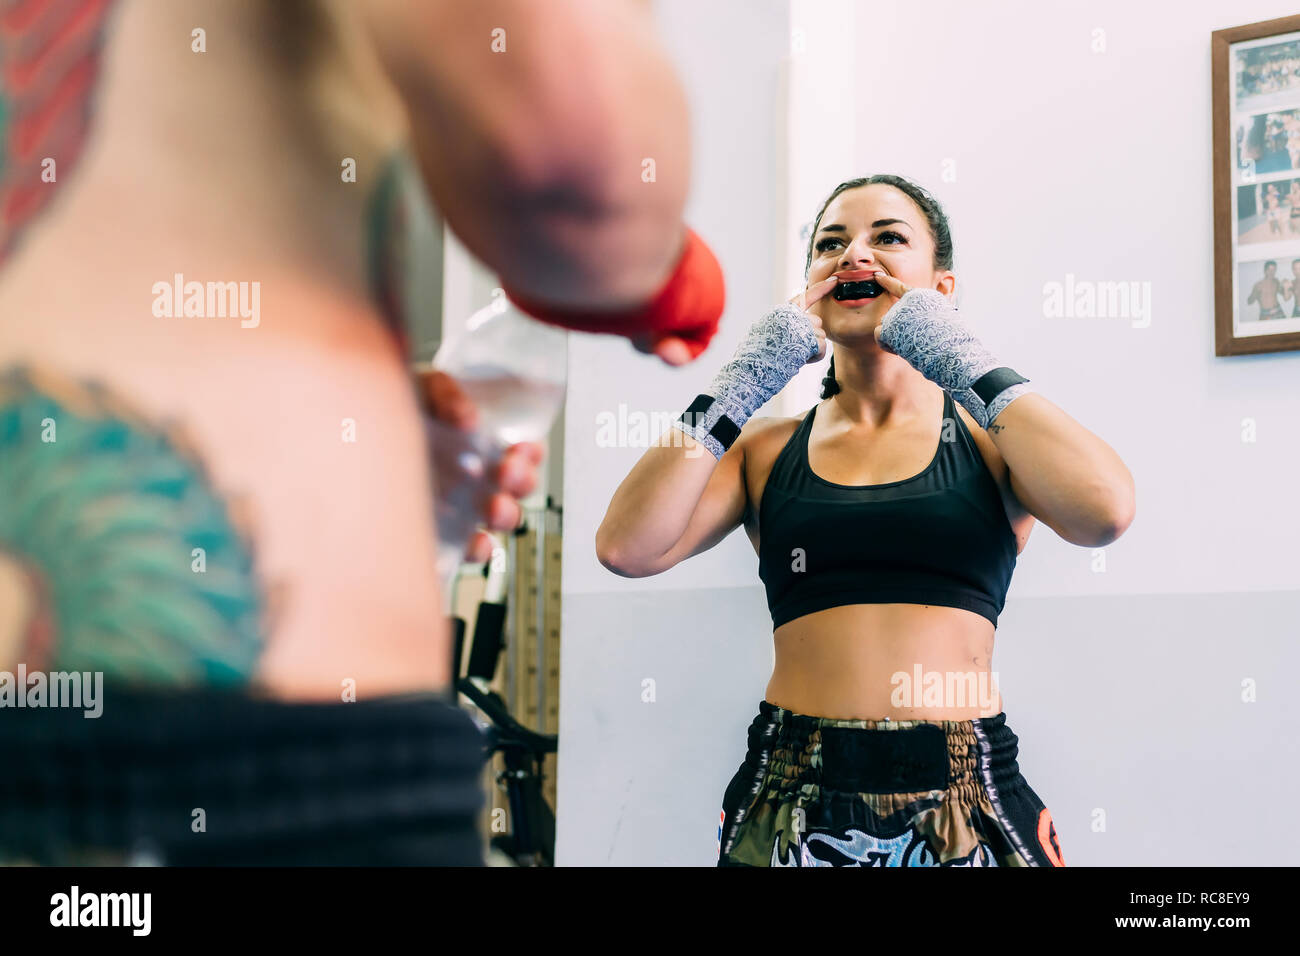 Female boxer putting on mouth guard Stock Photo